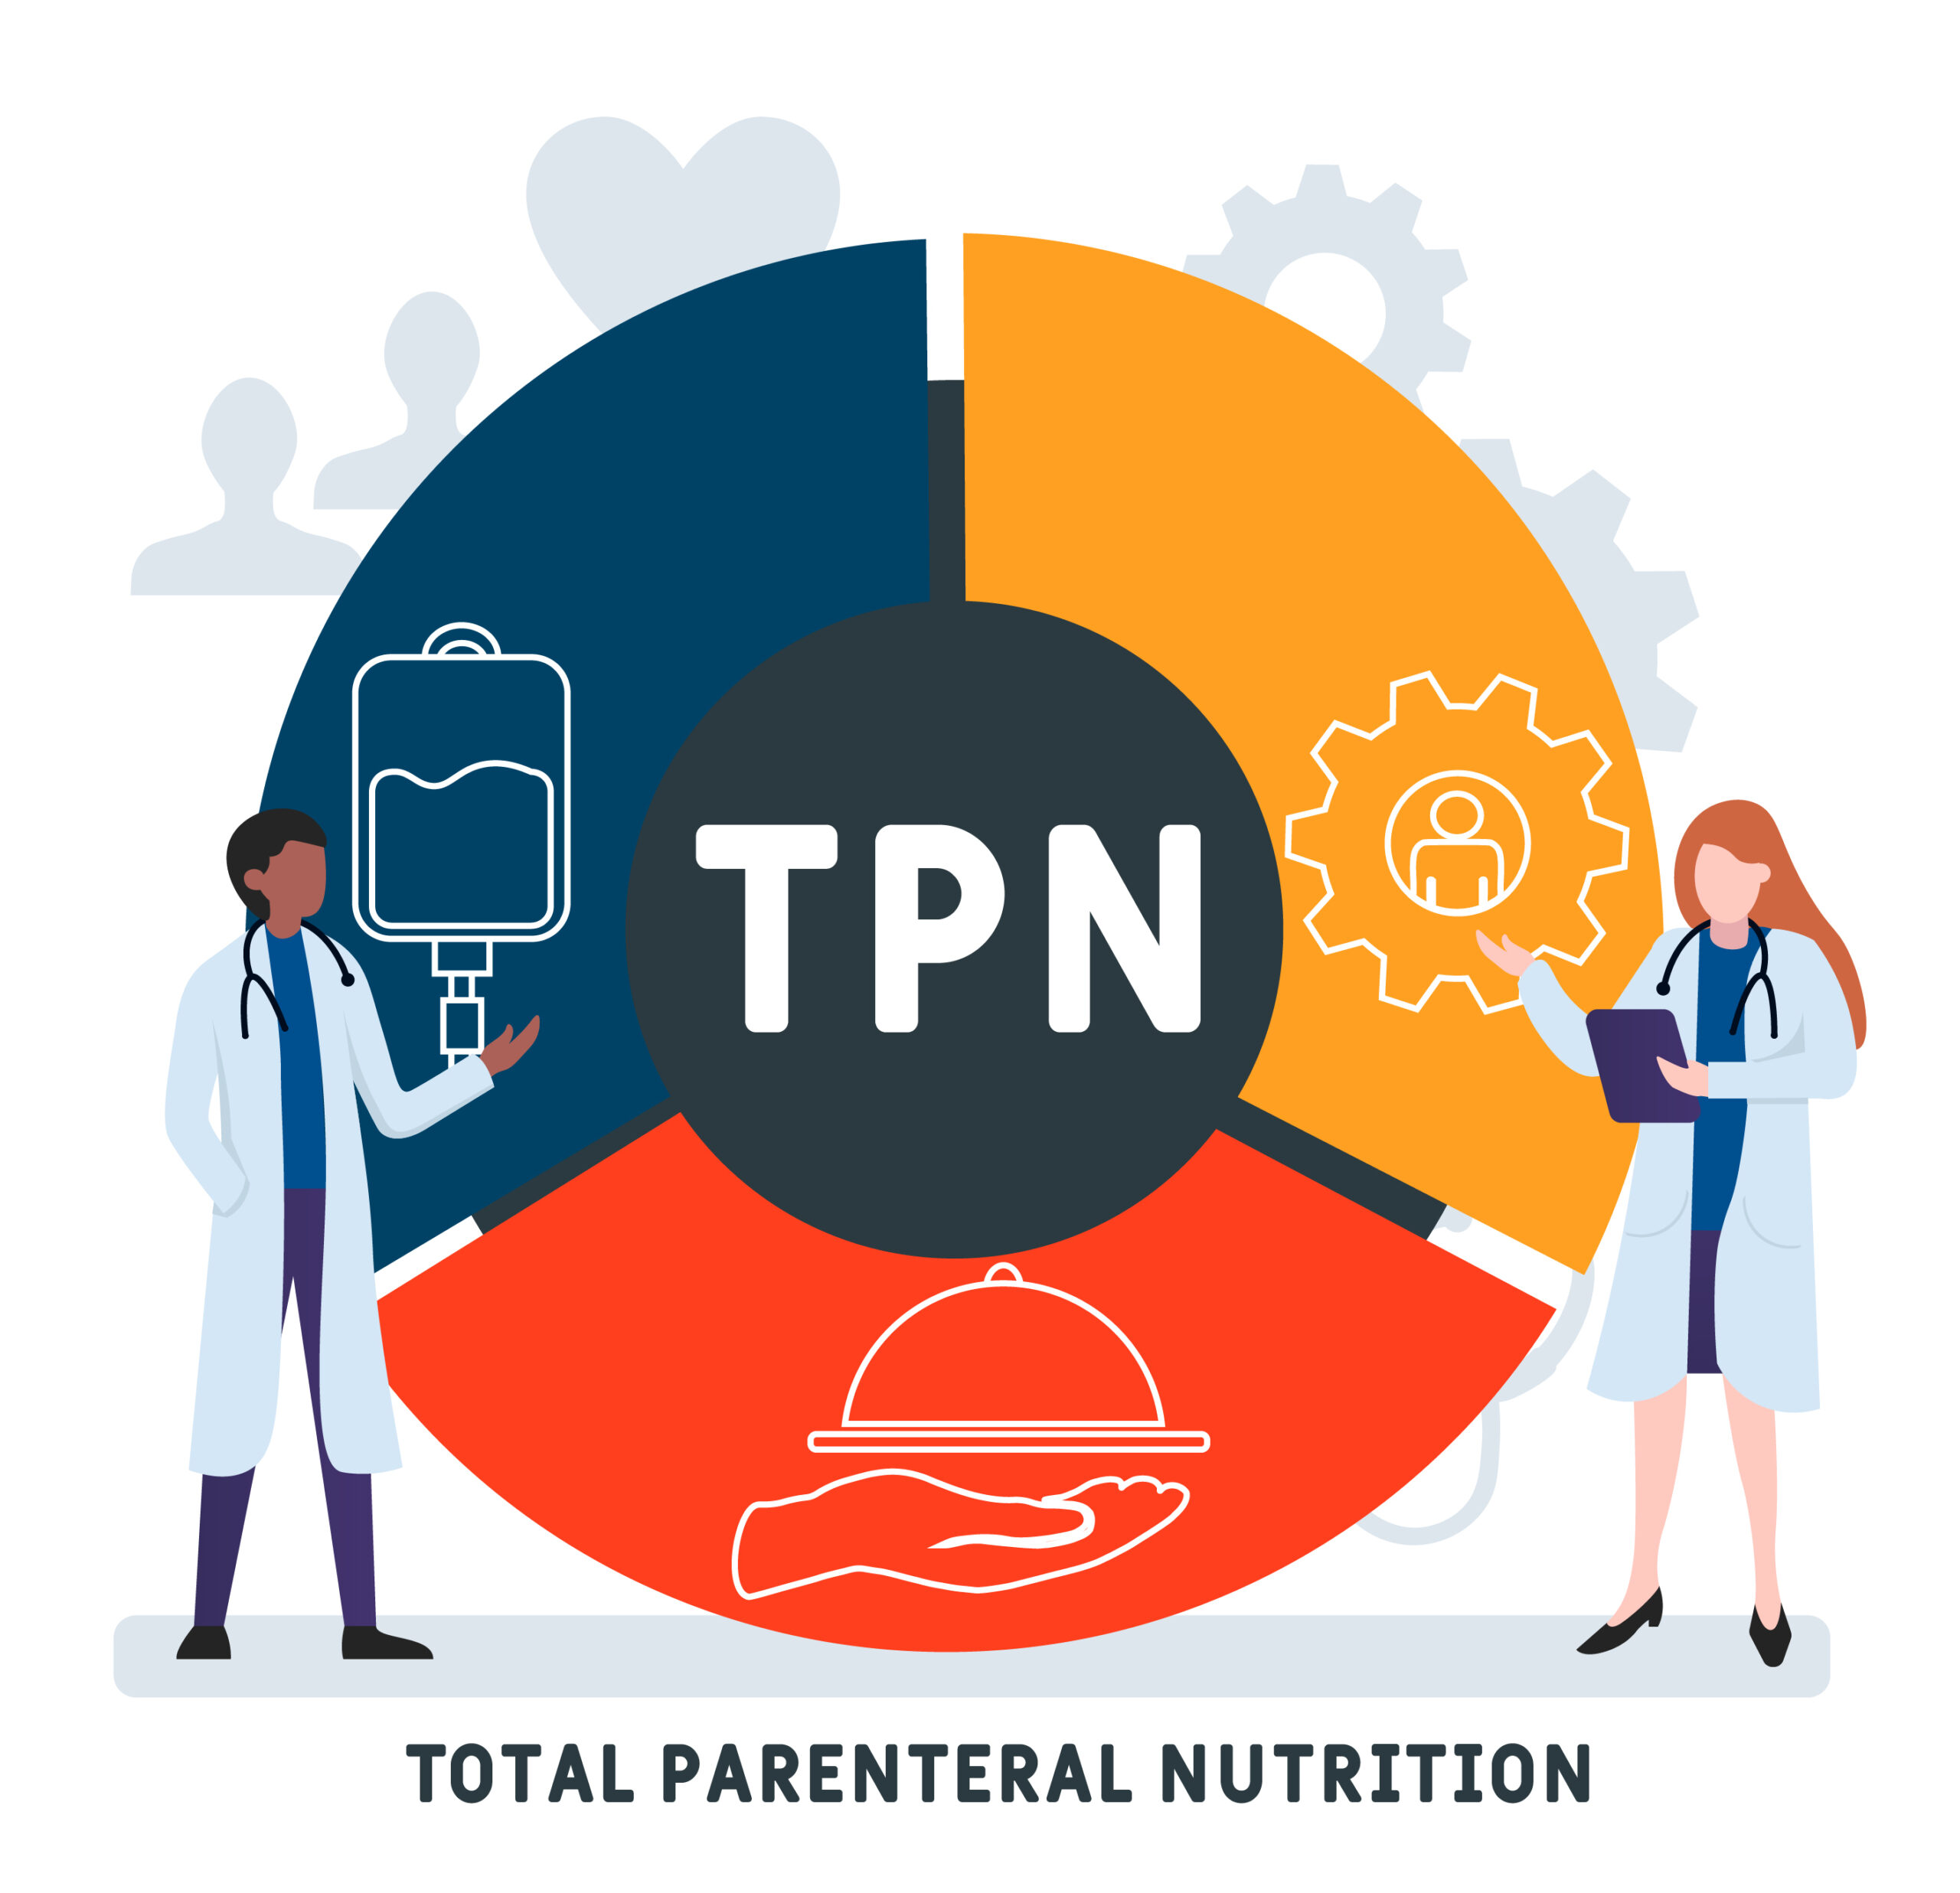 Flat design with people. TPN - Total Parenteral Nutrition acronym, medical concept background.